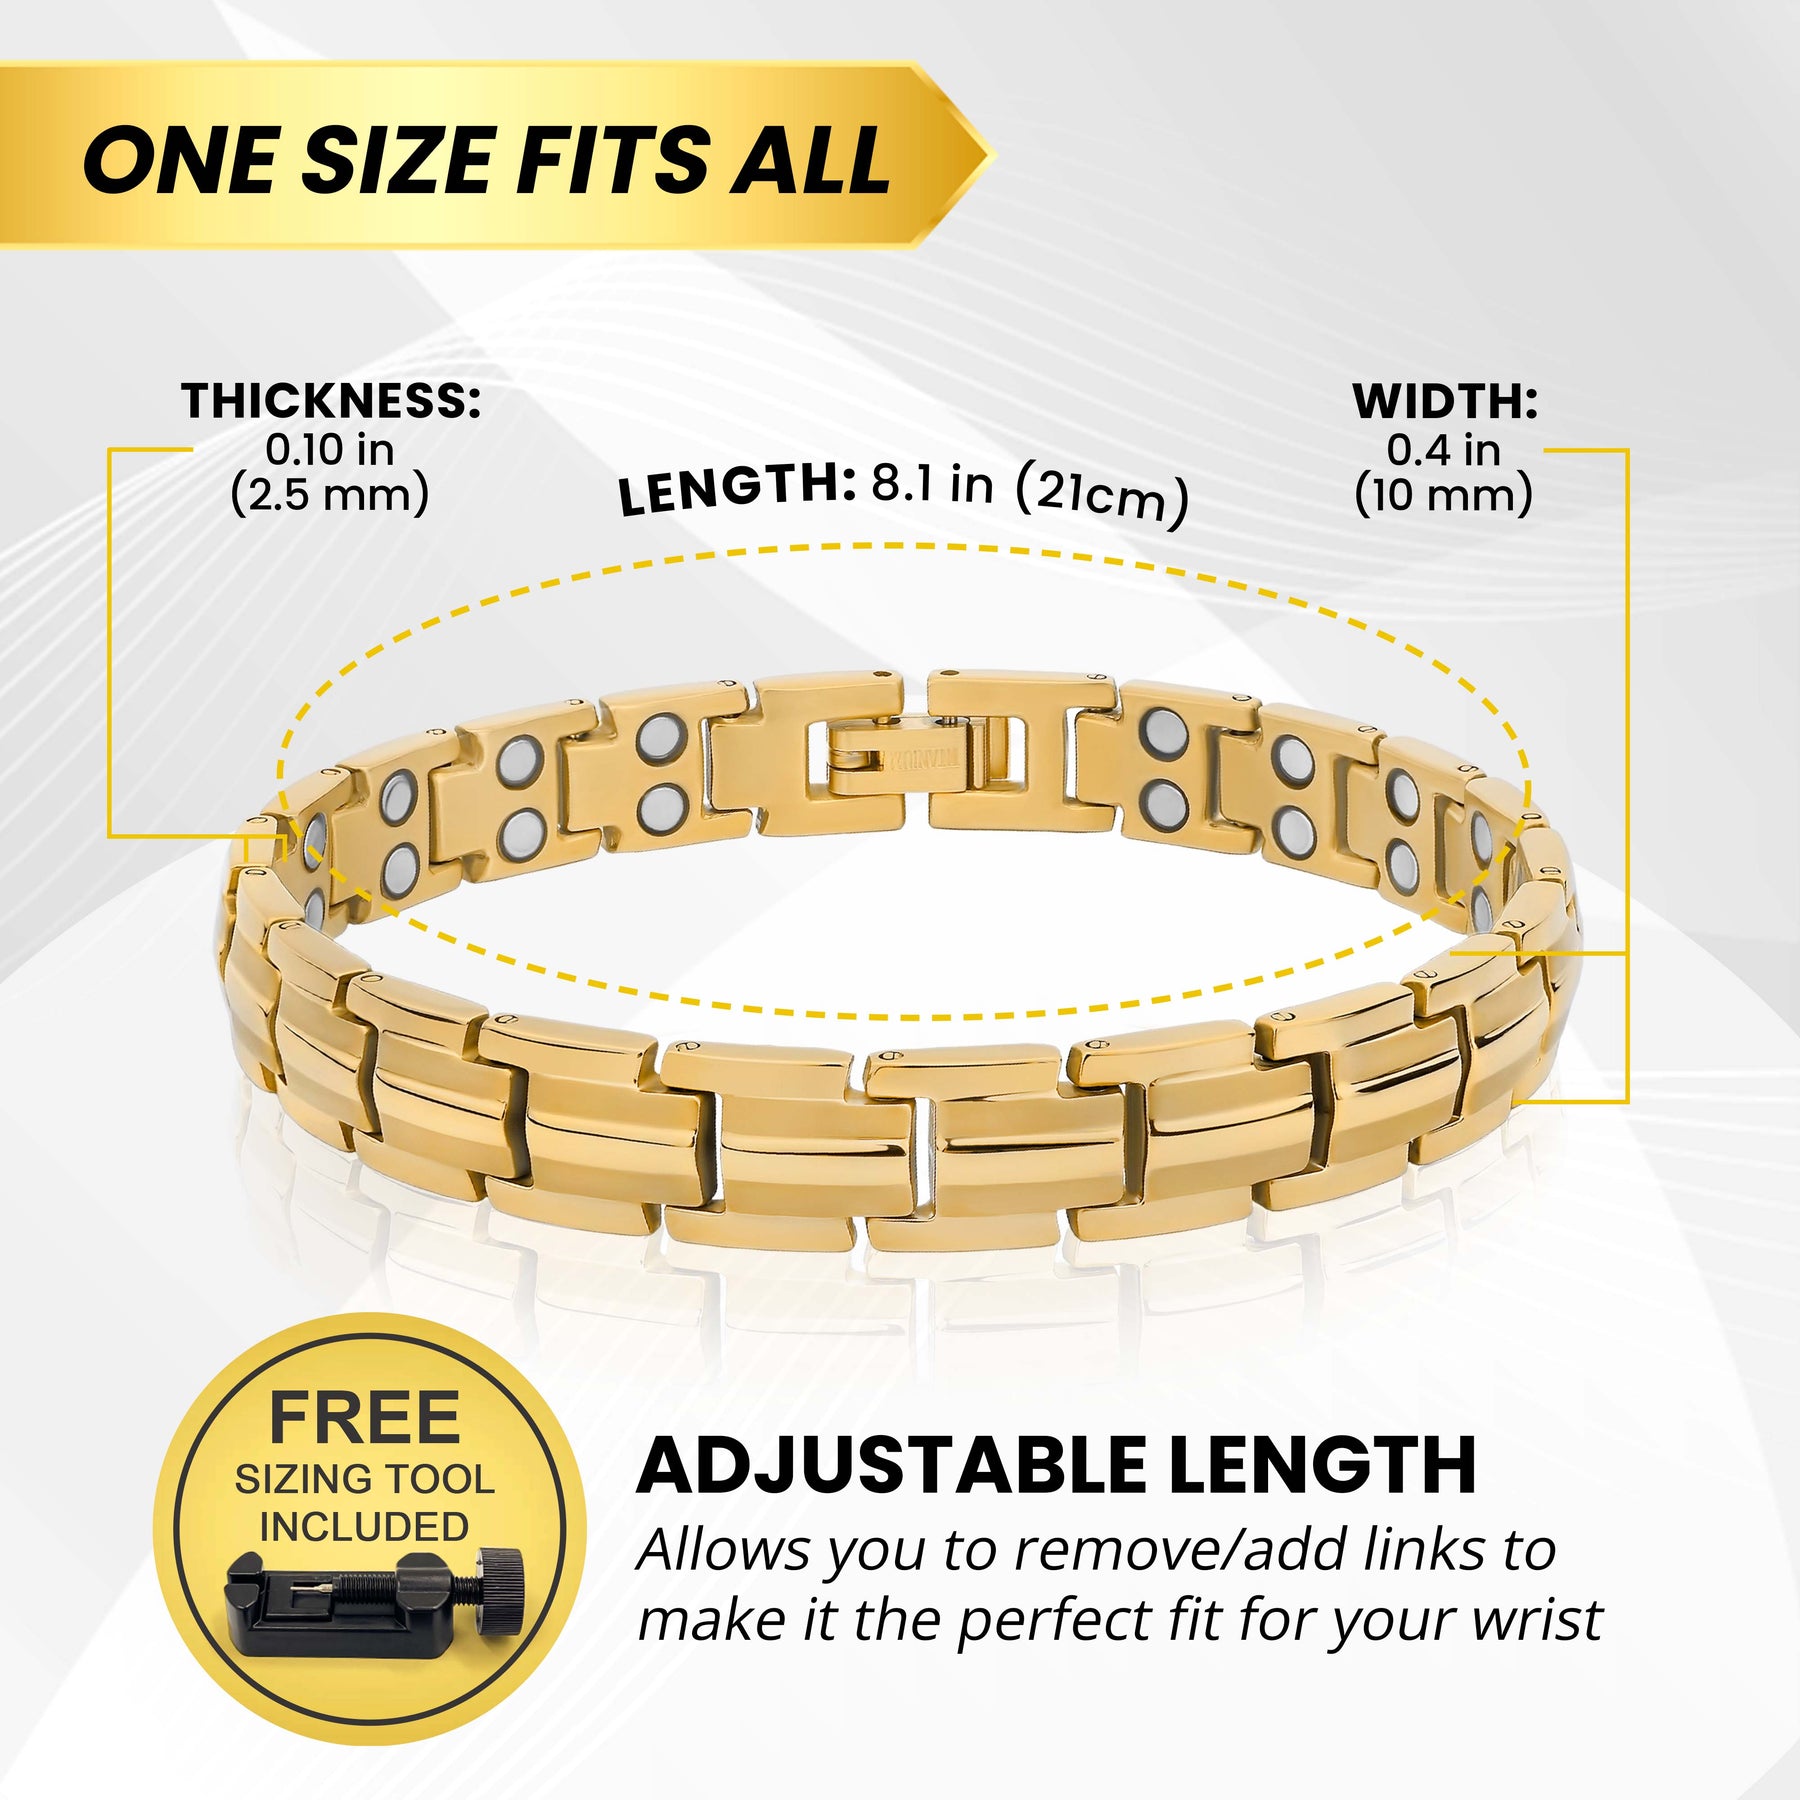 Women's Ultra Strength Gold Titanium Magnetic Therapy Bracelet